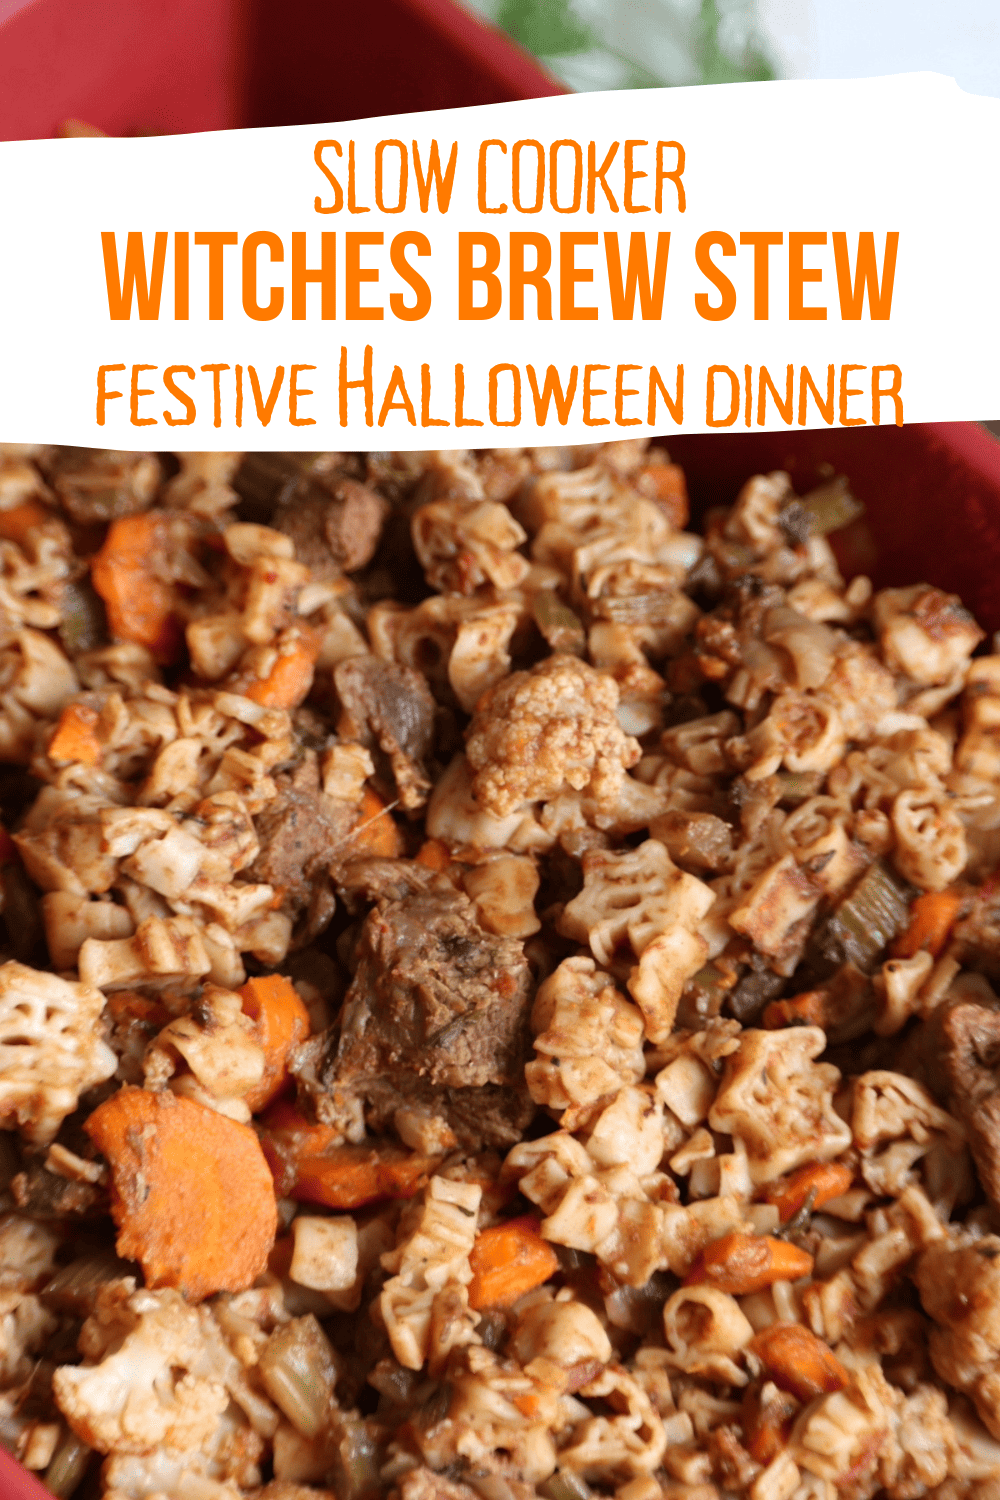 Slow Cooker Witches Brew Stew